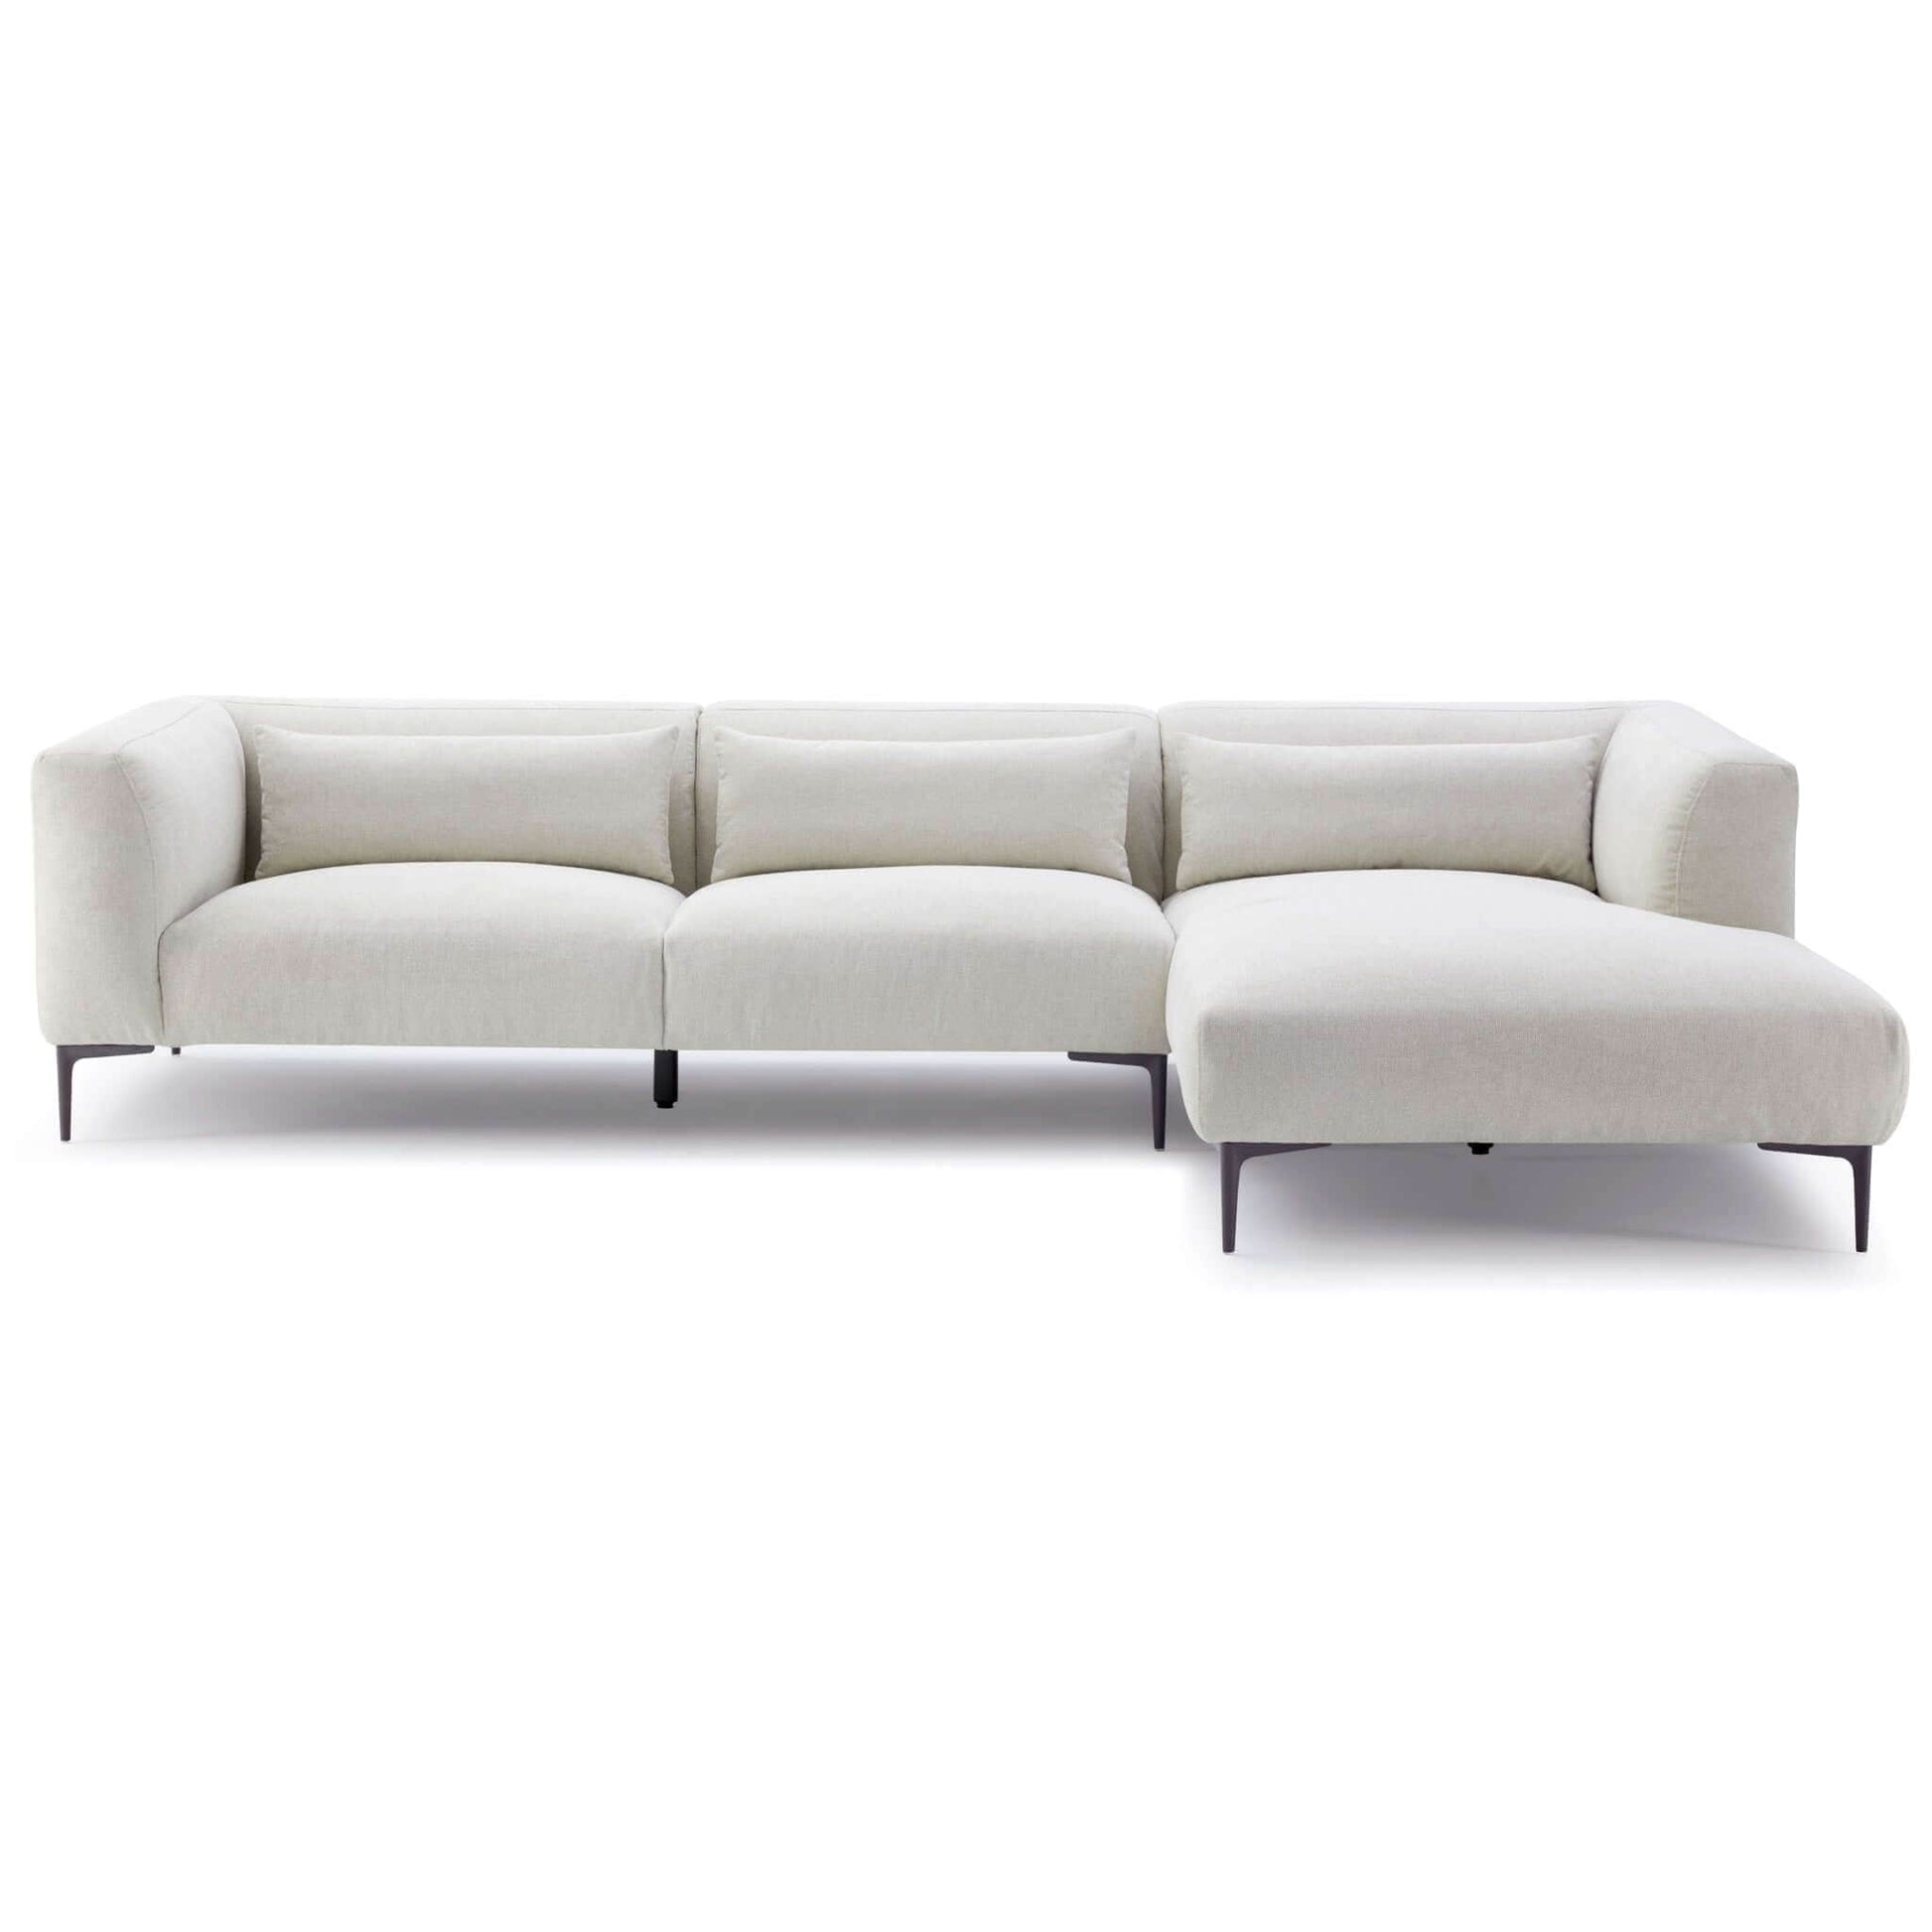 Ashcroft Furniture Co Sectional Sofas Right Sectional Laley L-Shaped Sectional in Cream